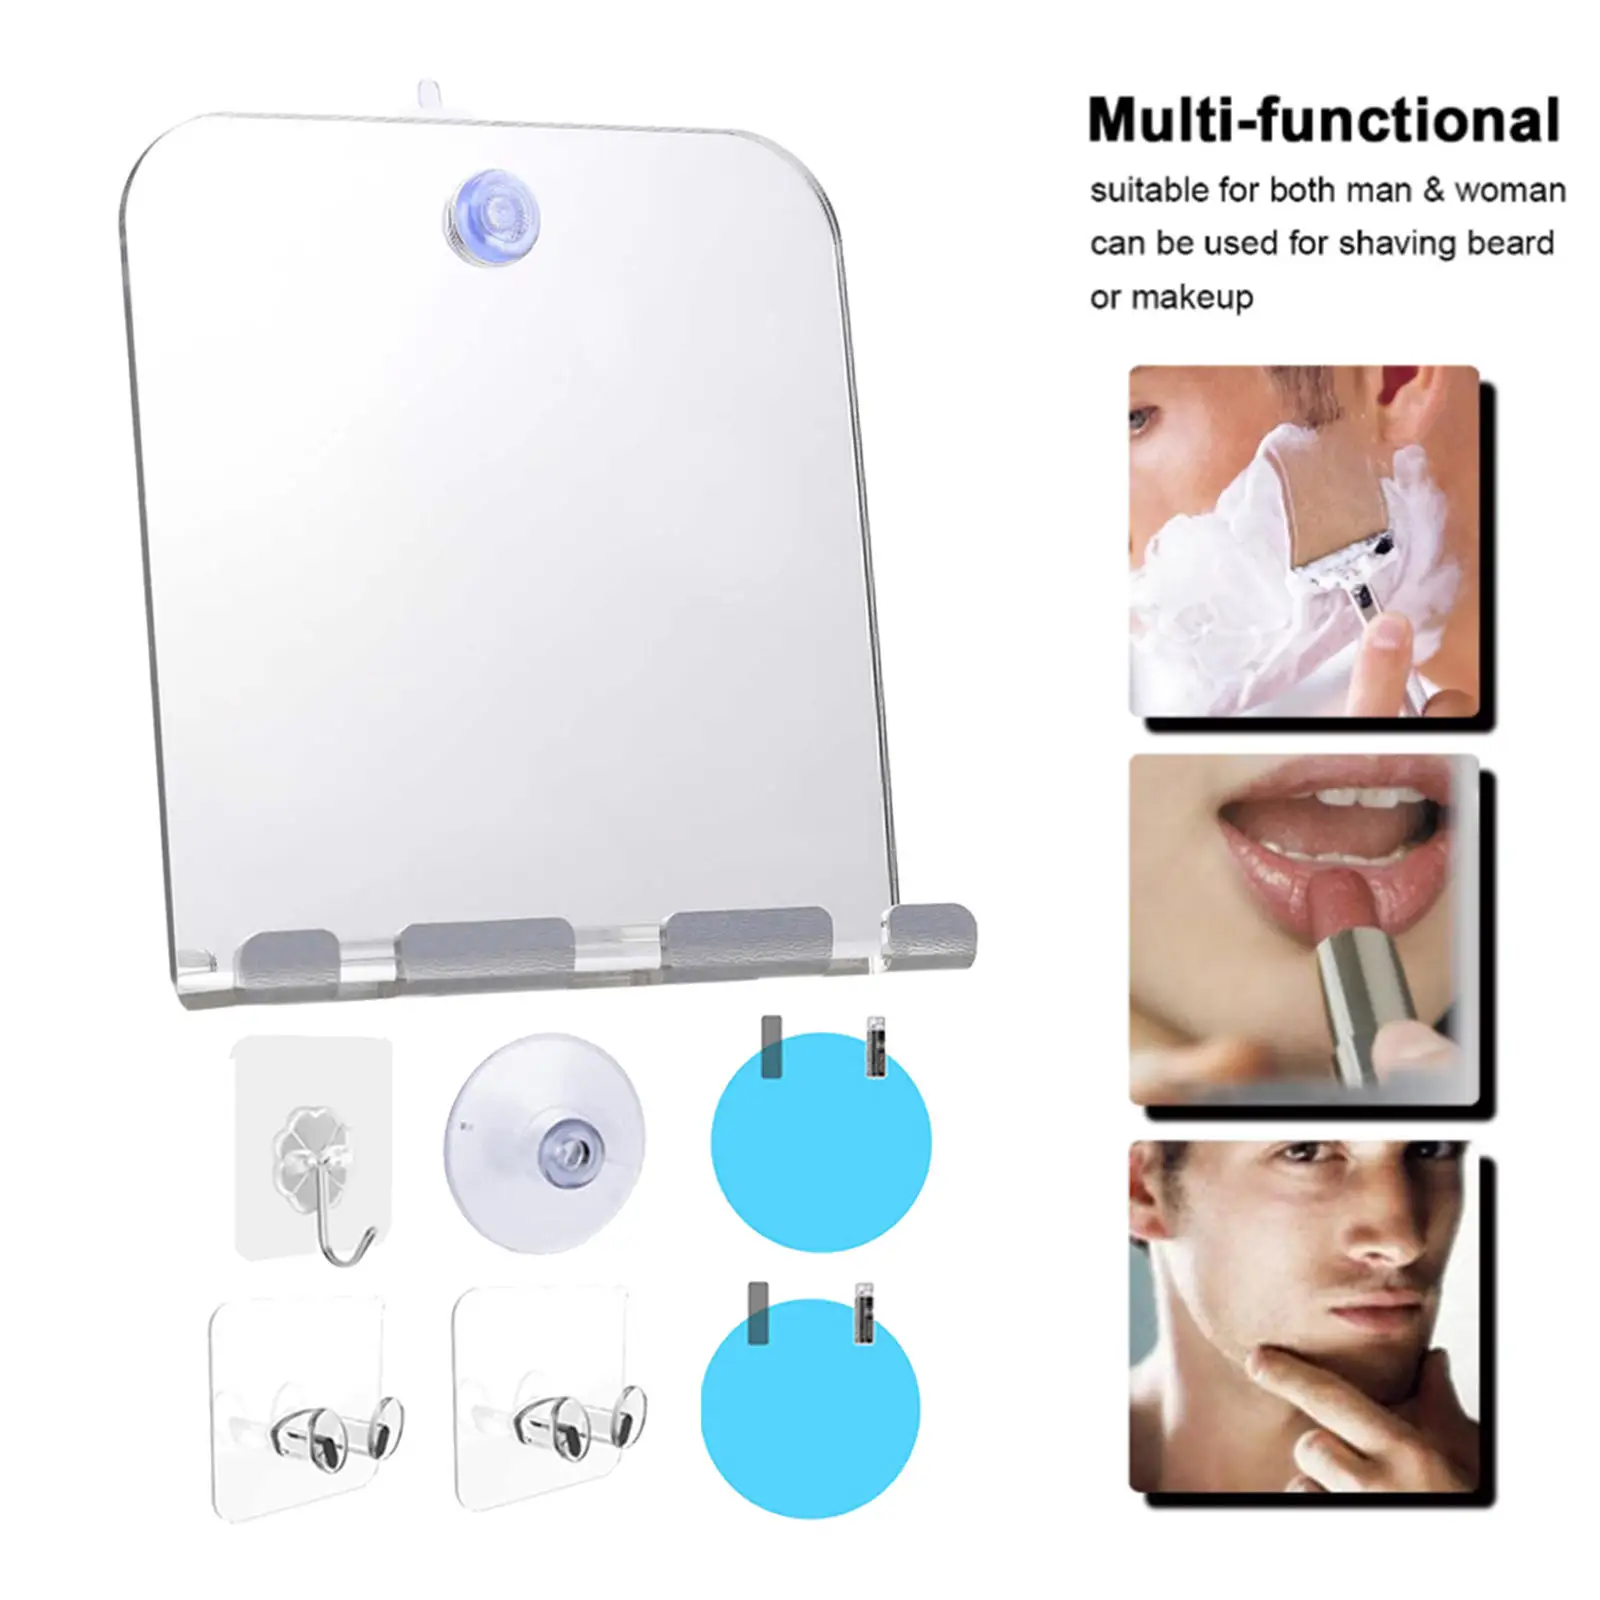 Portable Shatterproof Acrylic Fogless Shower Shaving Makeup Mirror with Suction Cup, Wall Hanging Bathroom Fog Free